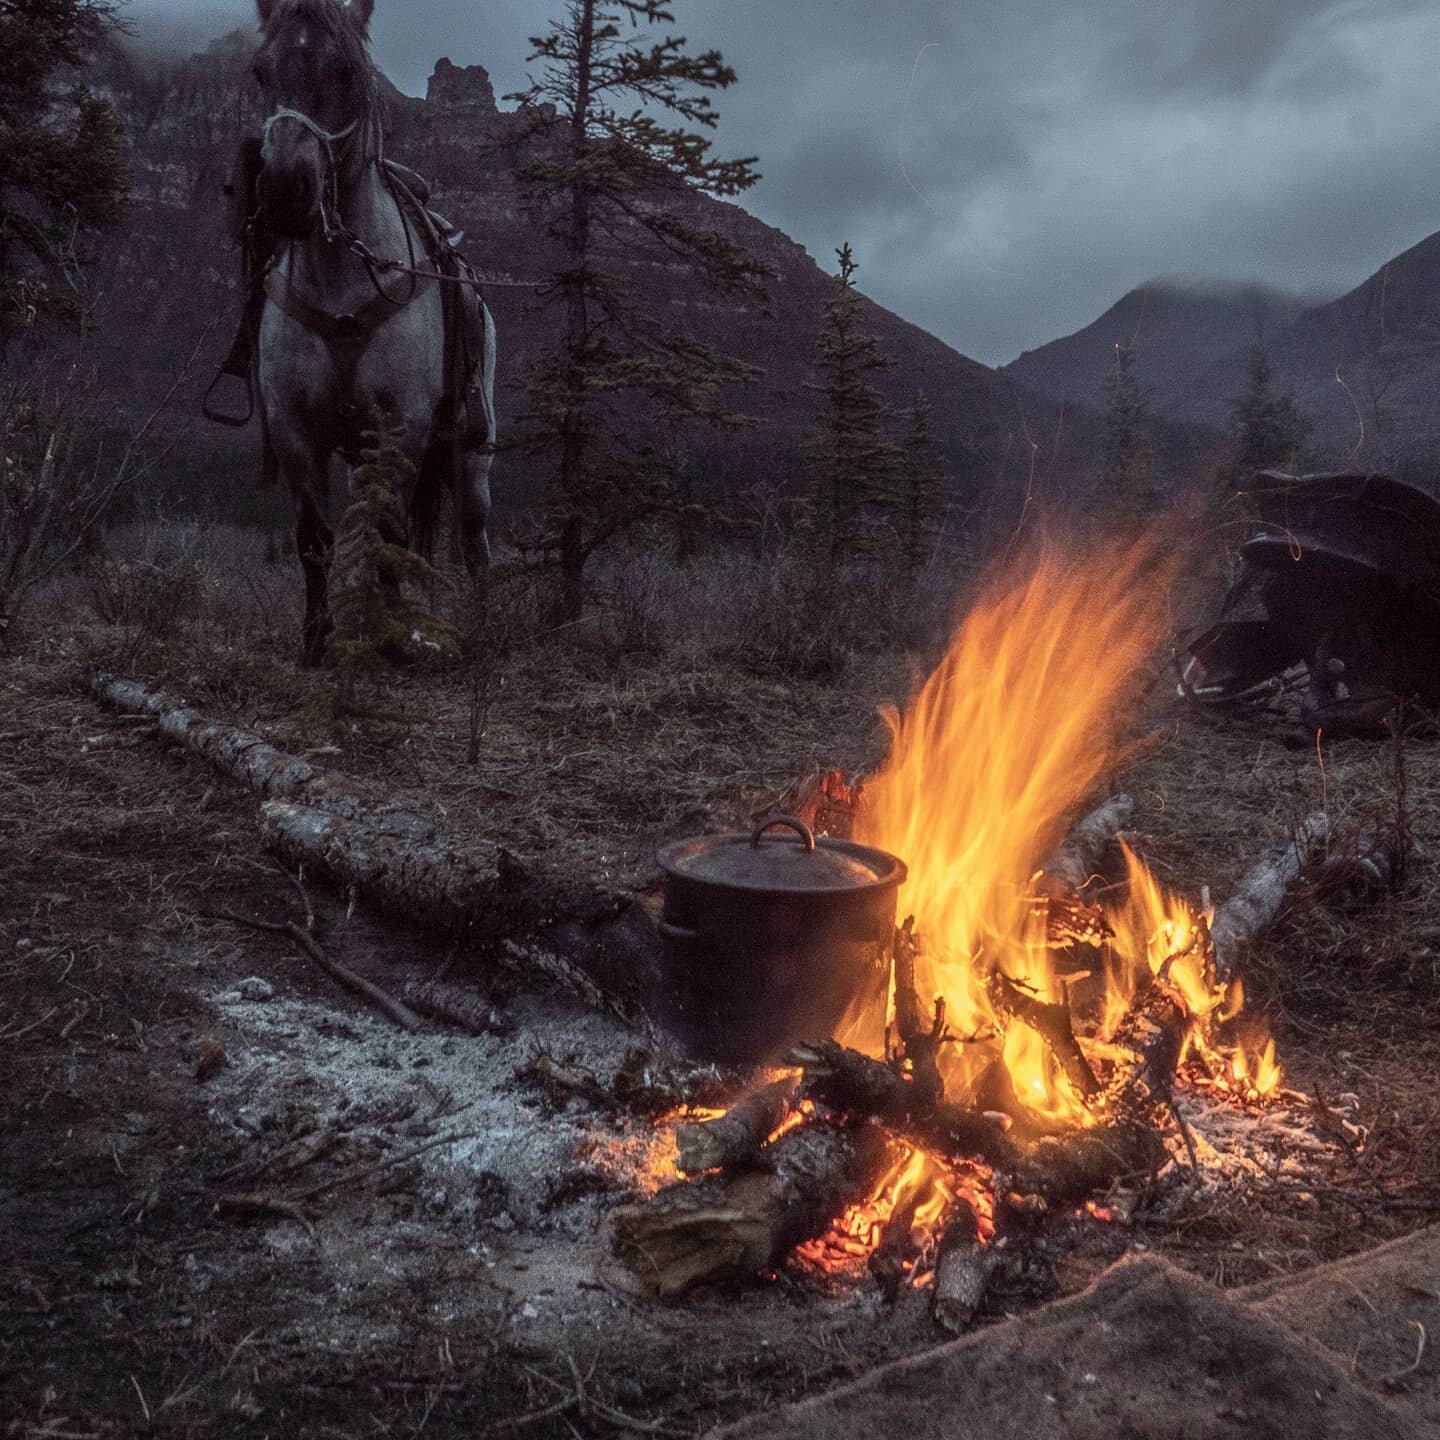 This was about as far north as I have ever been.  The Yukon is a beautiful beast.  Hope to be back soon! 

Best pot of coffee - end of story!

#yukon #sheephunting #wildsheepfoundation #adventure #campfire #campfirecooking